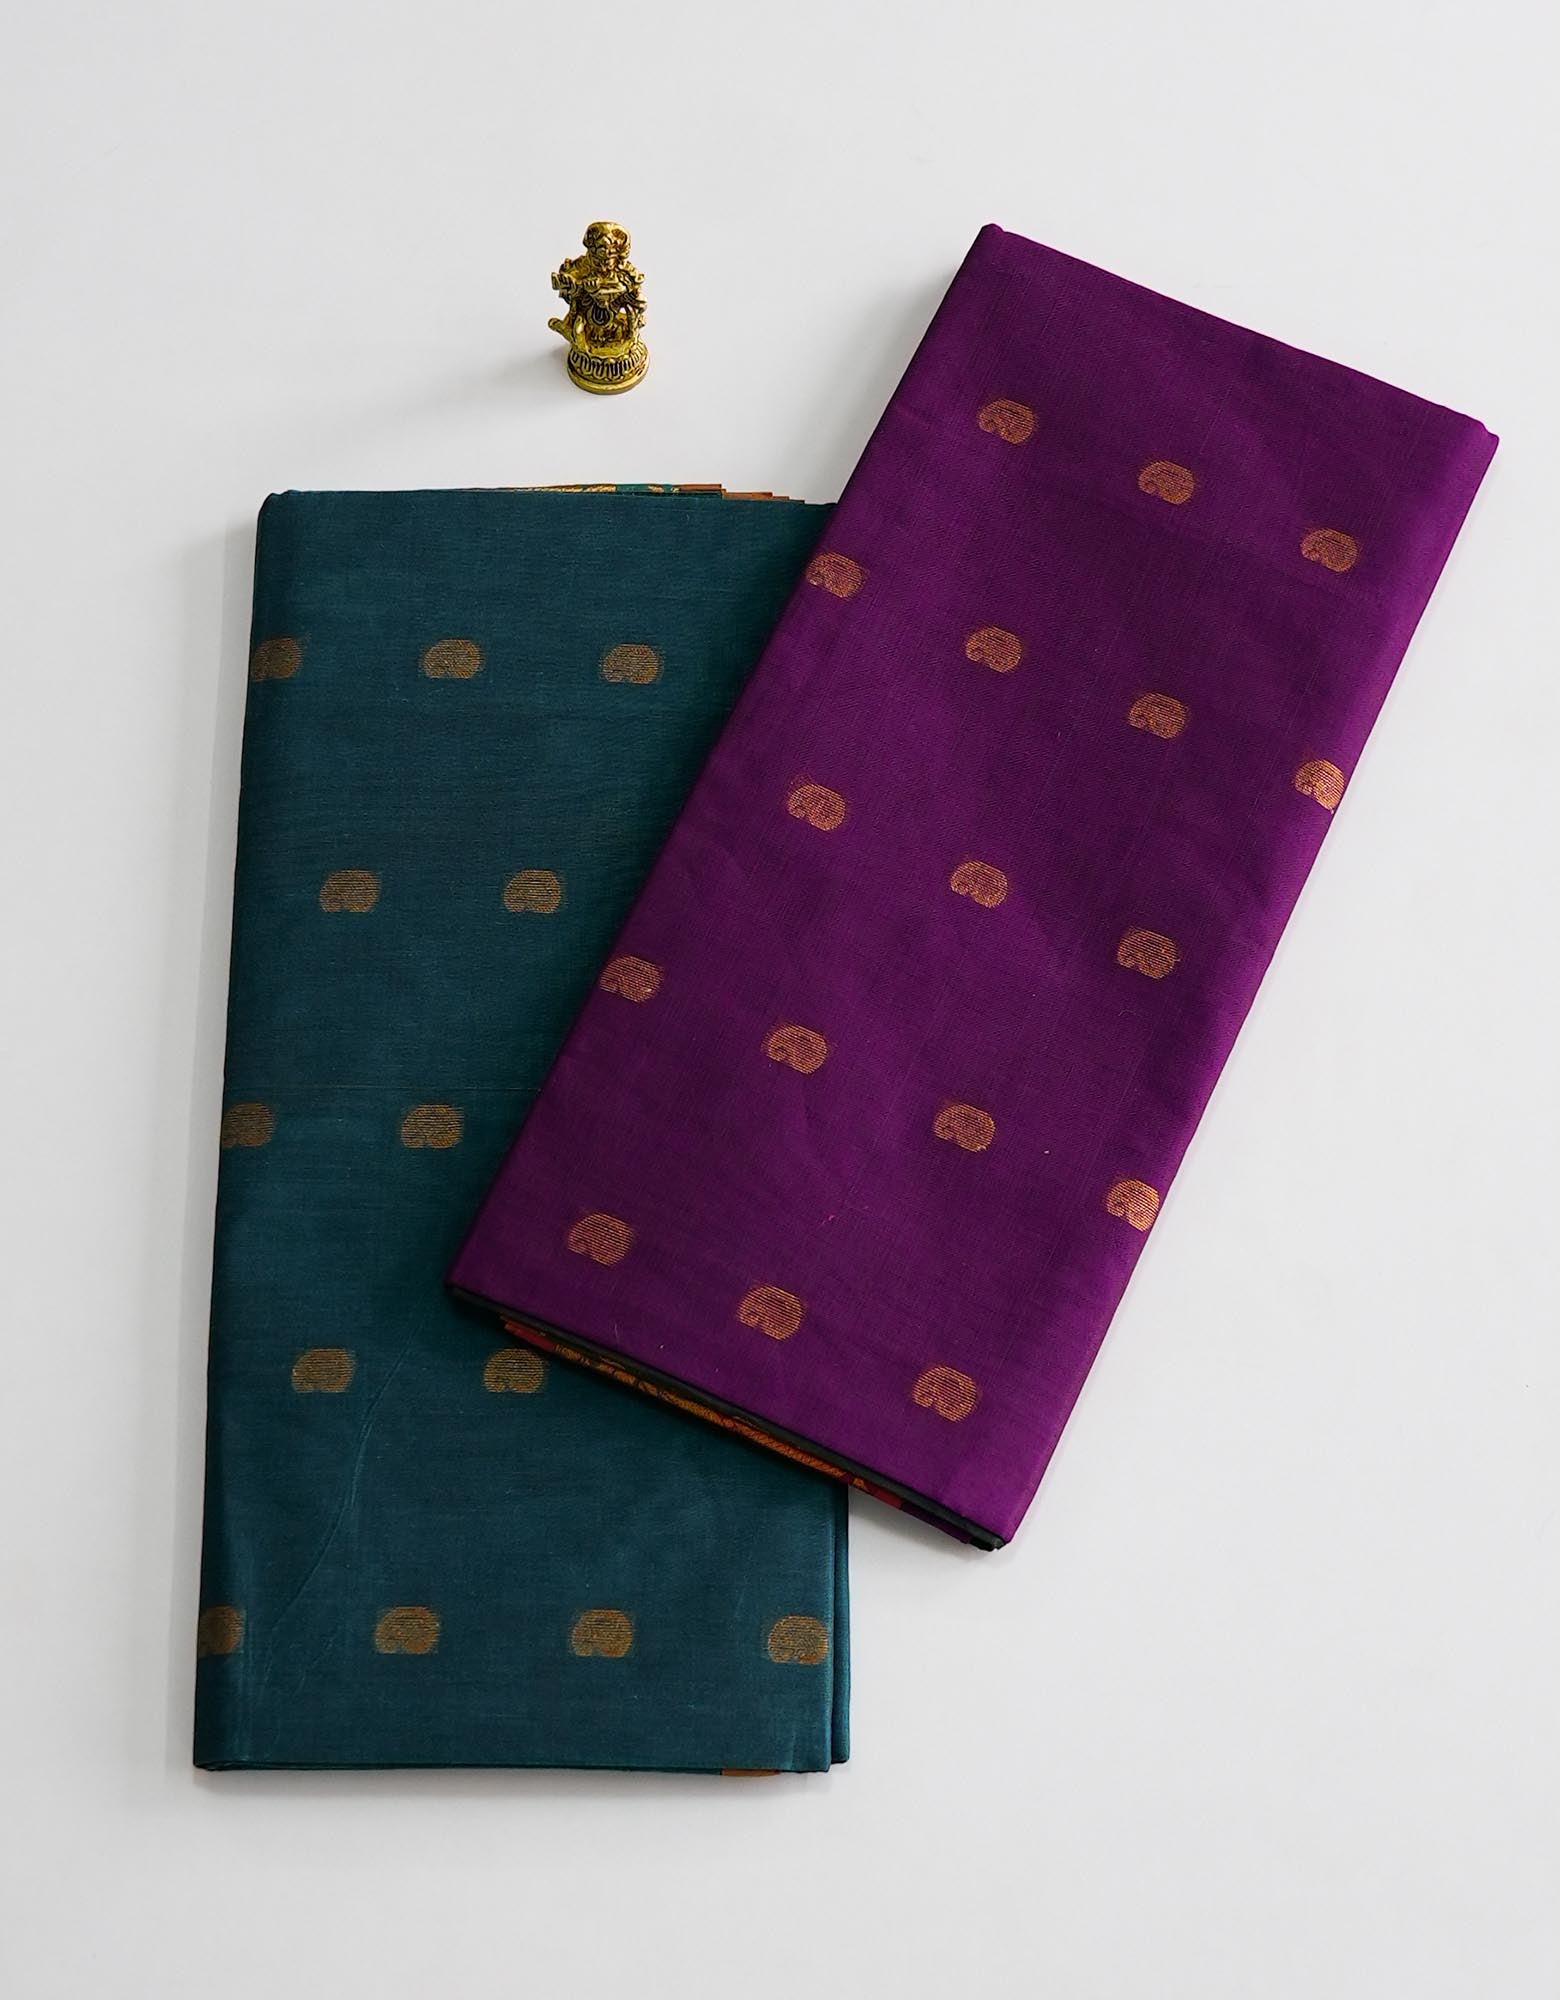 Venkatagiri Cotton Saree with two different colors pine green and plum purple